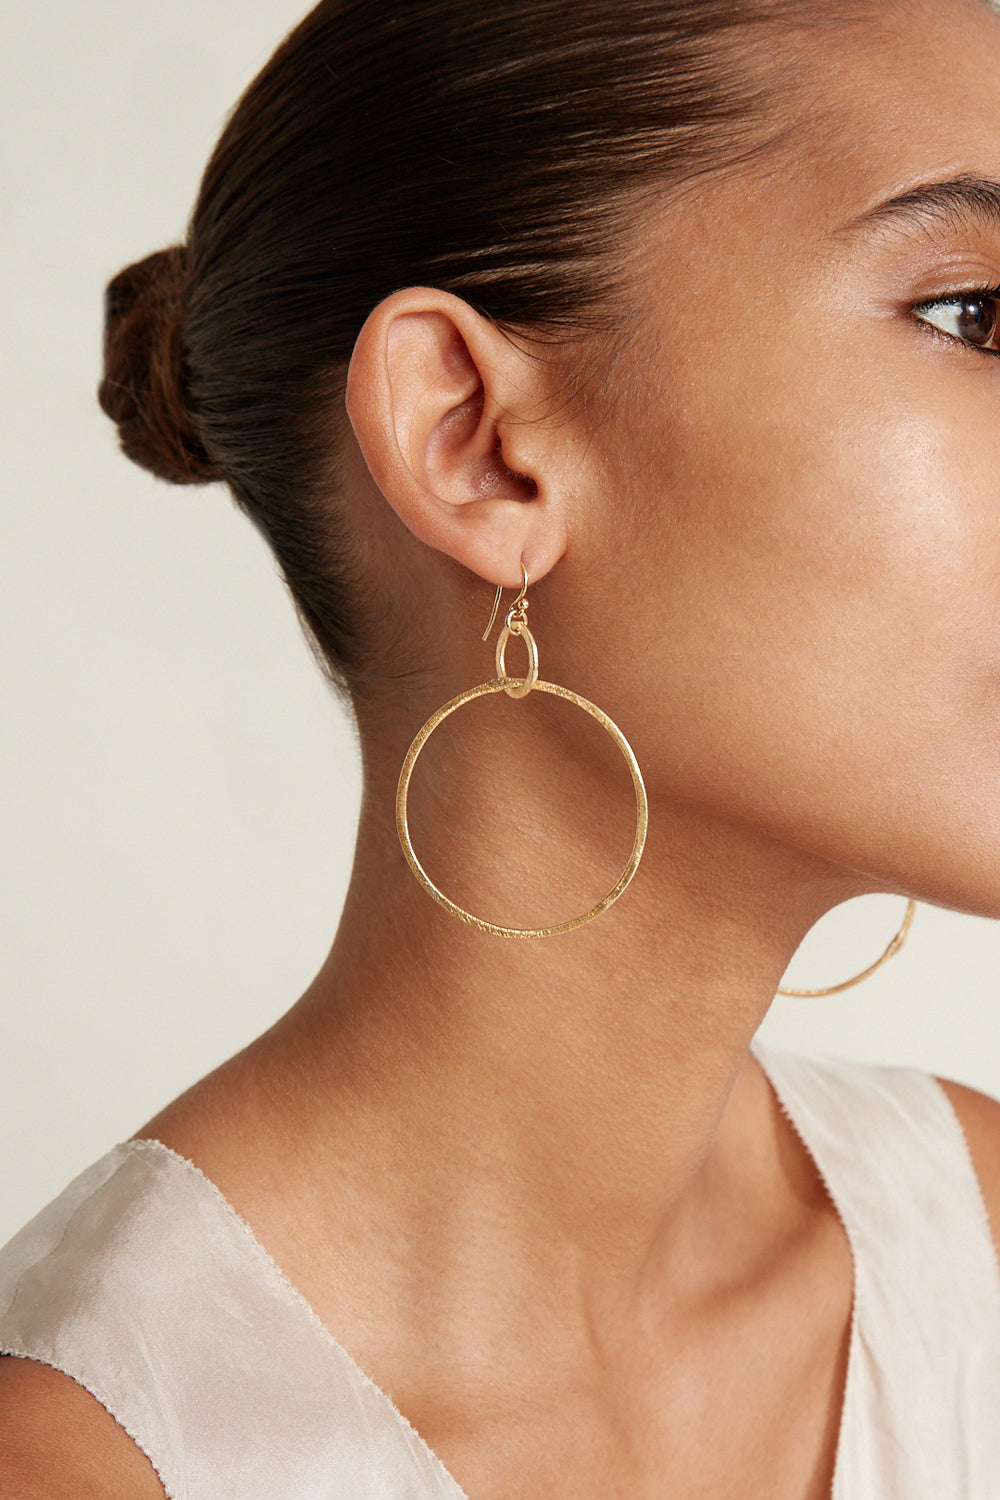 HOOPS EARRINGS-YELLOW GOLD - Kingfisher Road - Online Boutique